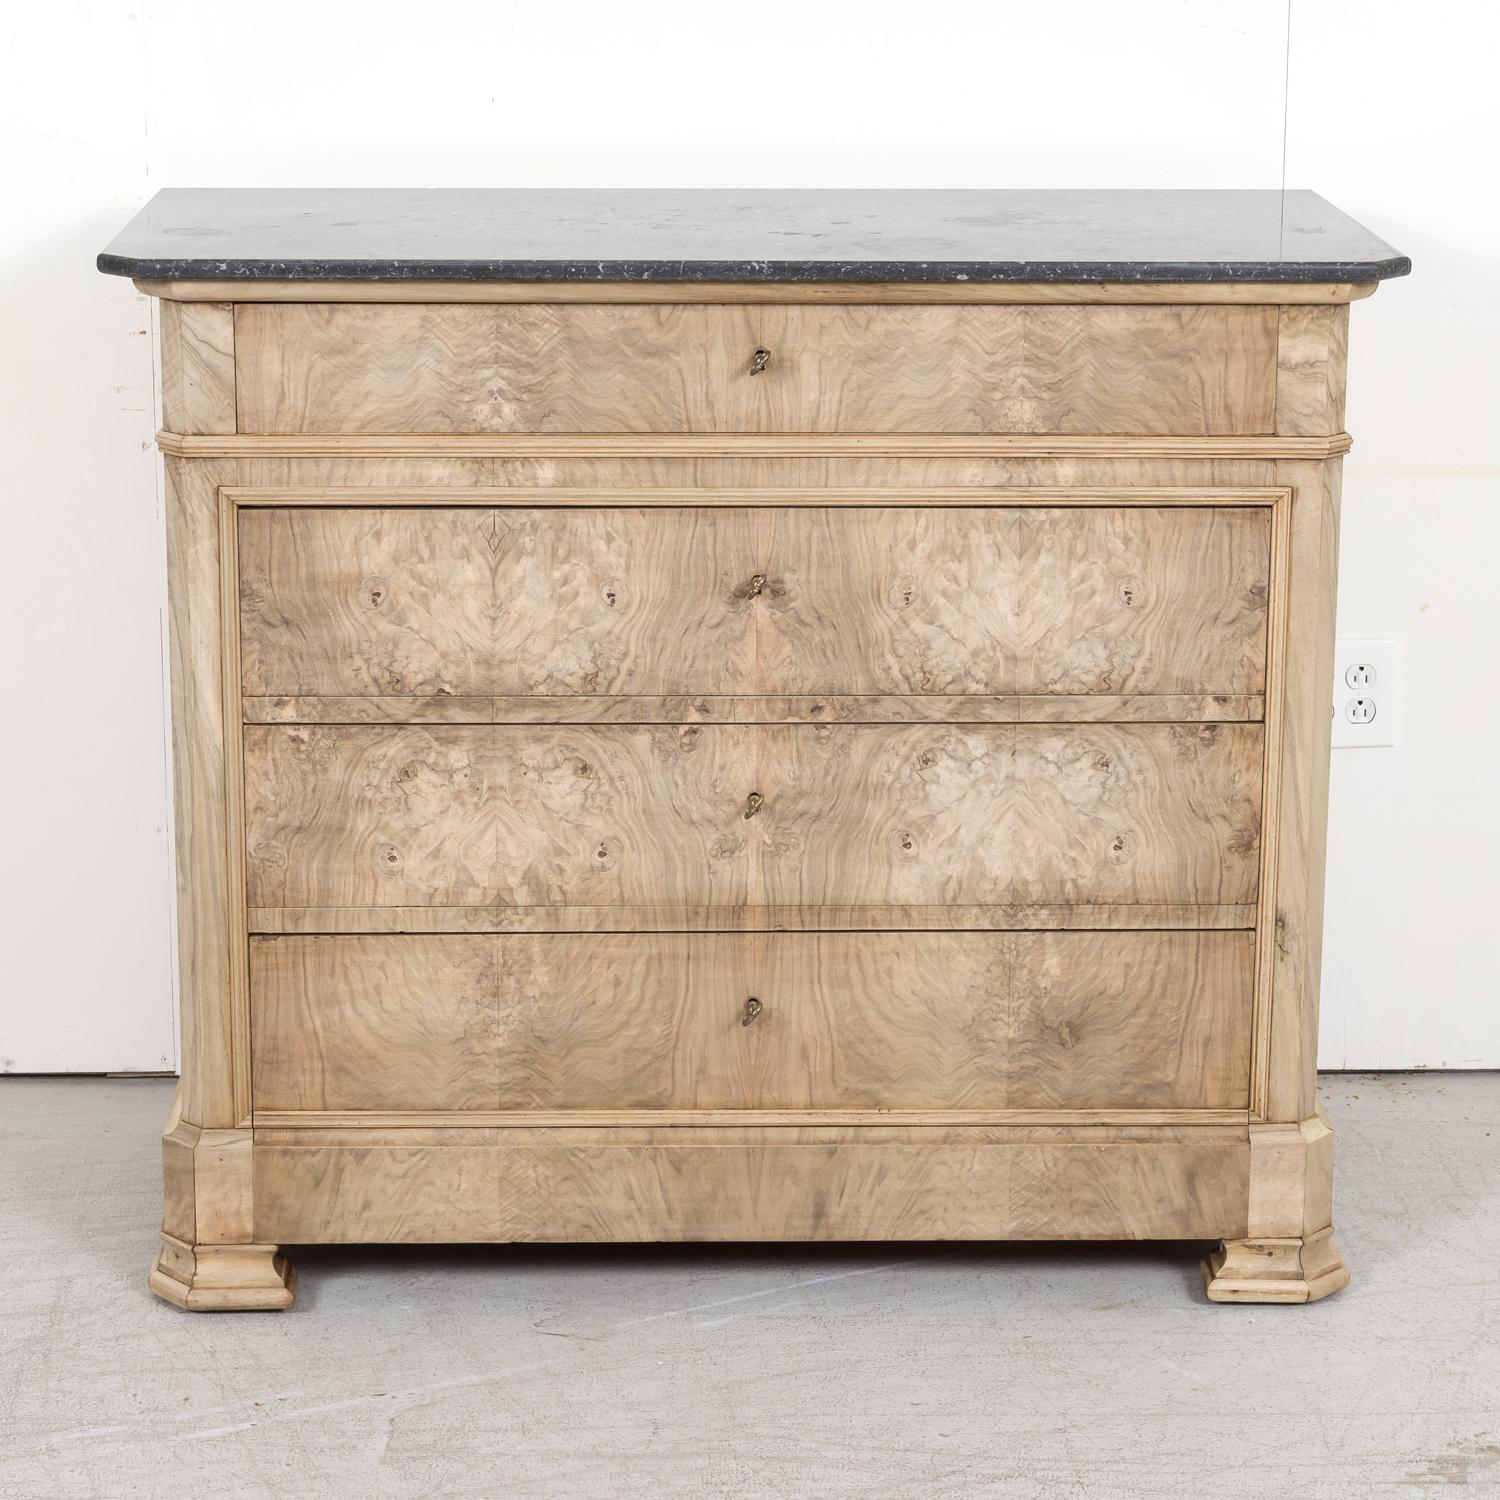 A handsome 19th century French Louis Philippe style four-drawer bleached commode handcrafted of walnut with a meticulously bookmatched burled walnut front by skilled artisans in the South of France near Avignon, circa 1880s. This striking commode